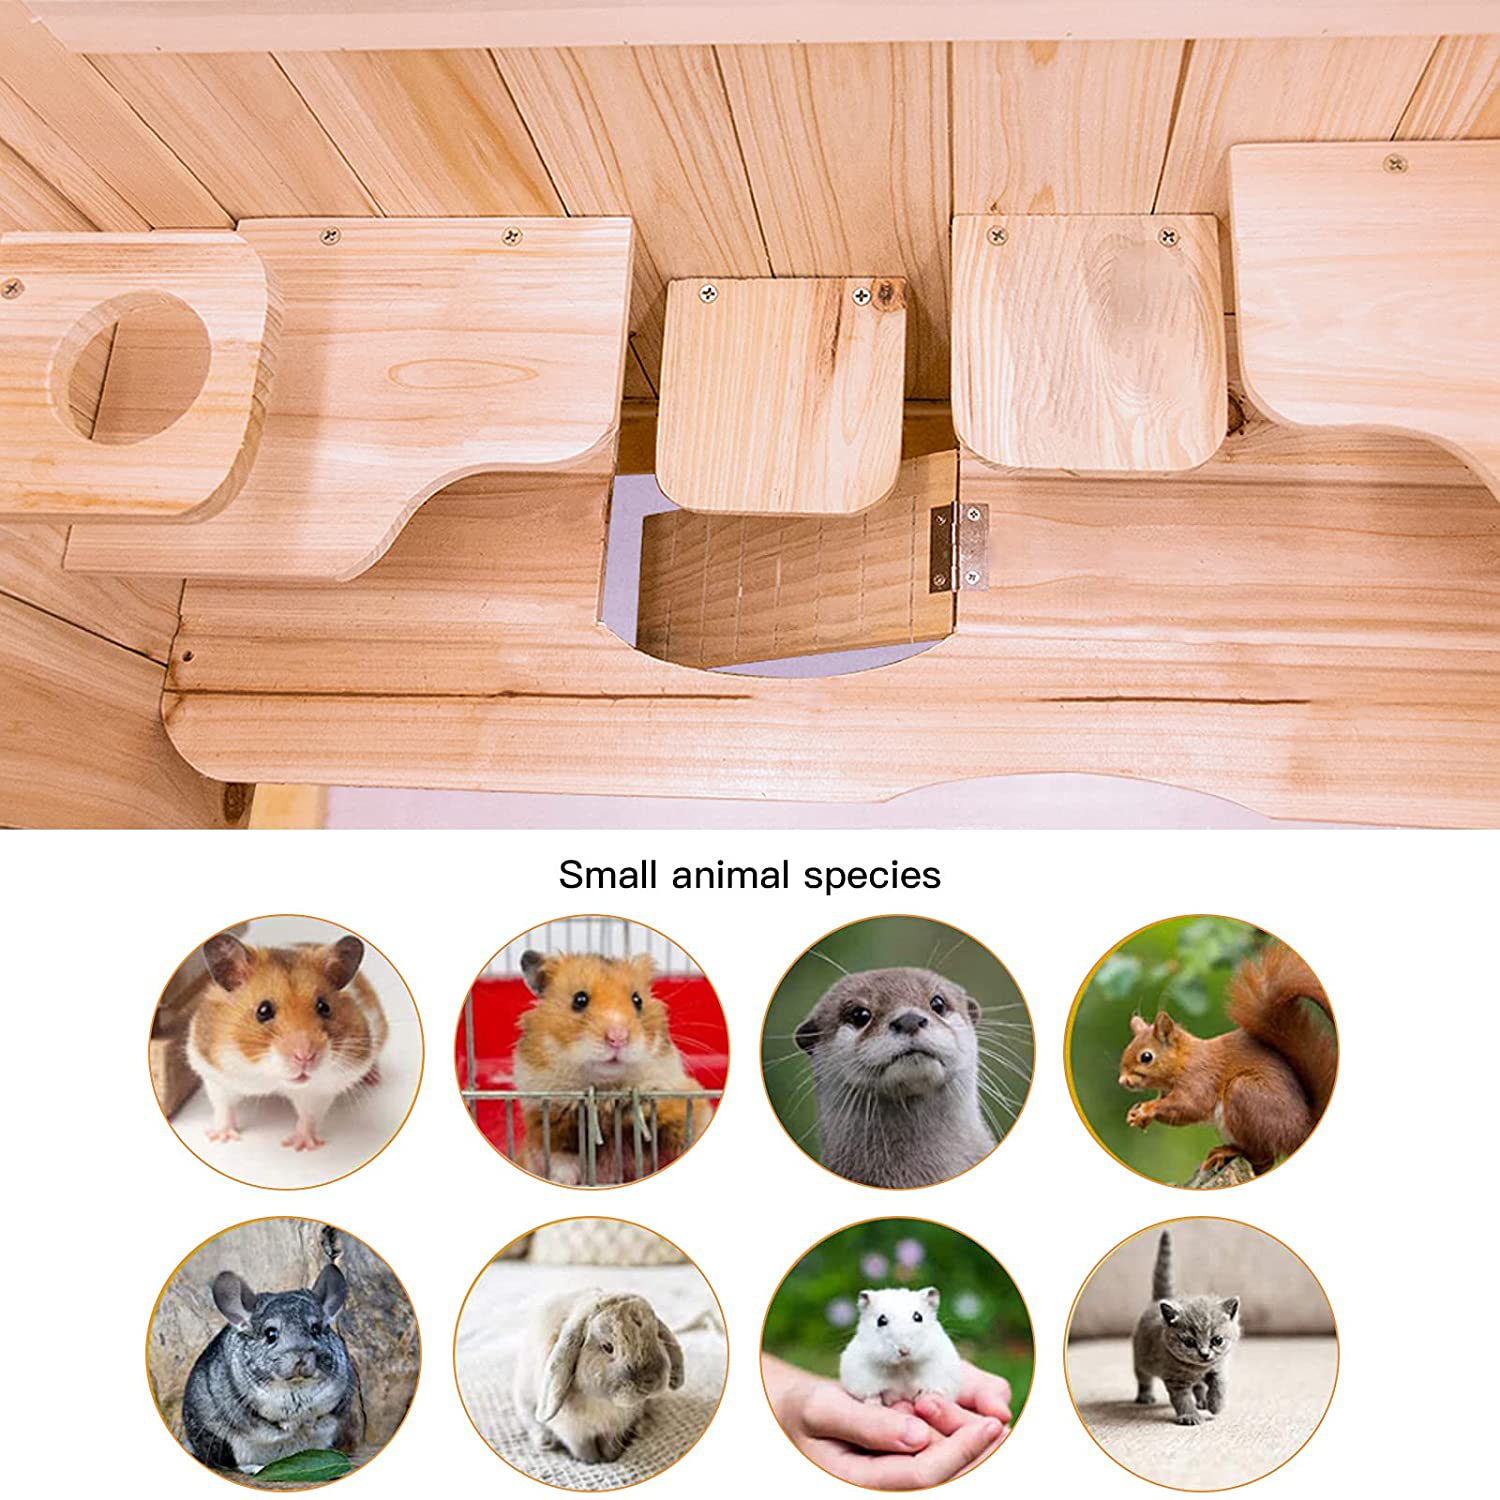 Rubor Wooden Hamster Cage Mice and Rat Habitat Small Animal Habitat for Rabbits, Guinea Pigs, Chinchillas with Openable Top and Large Acrylic Sheets